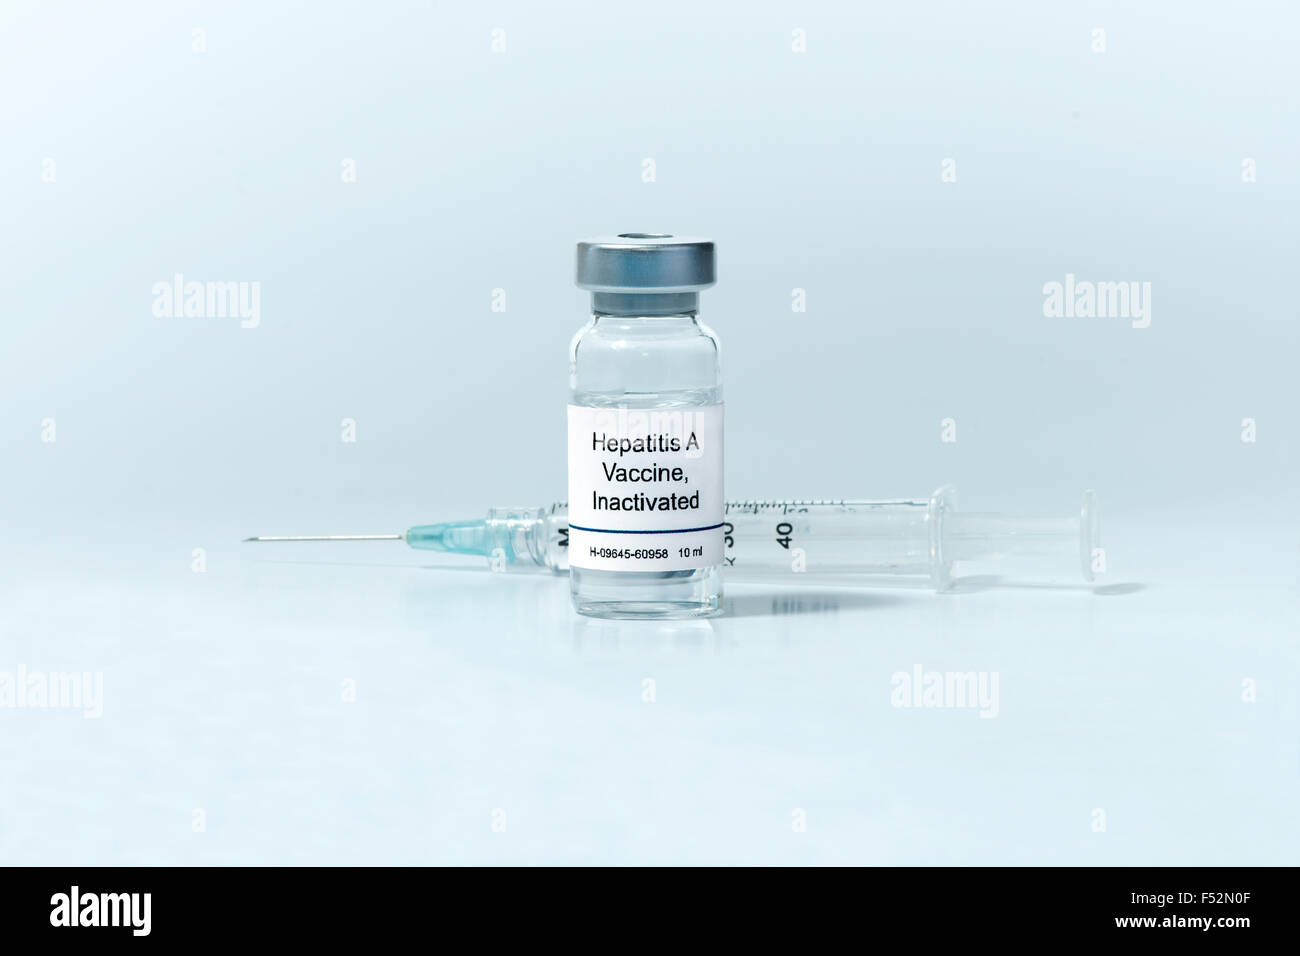 Hepatitis A vaccine in clear vial with syringe. Stock Photo